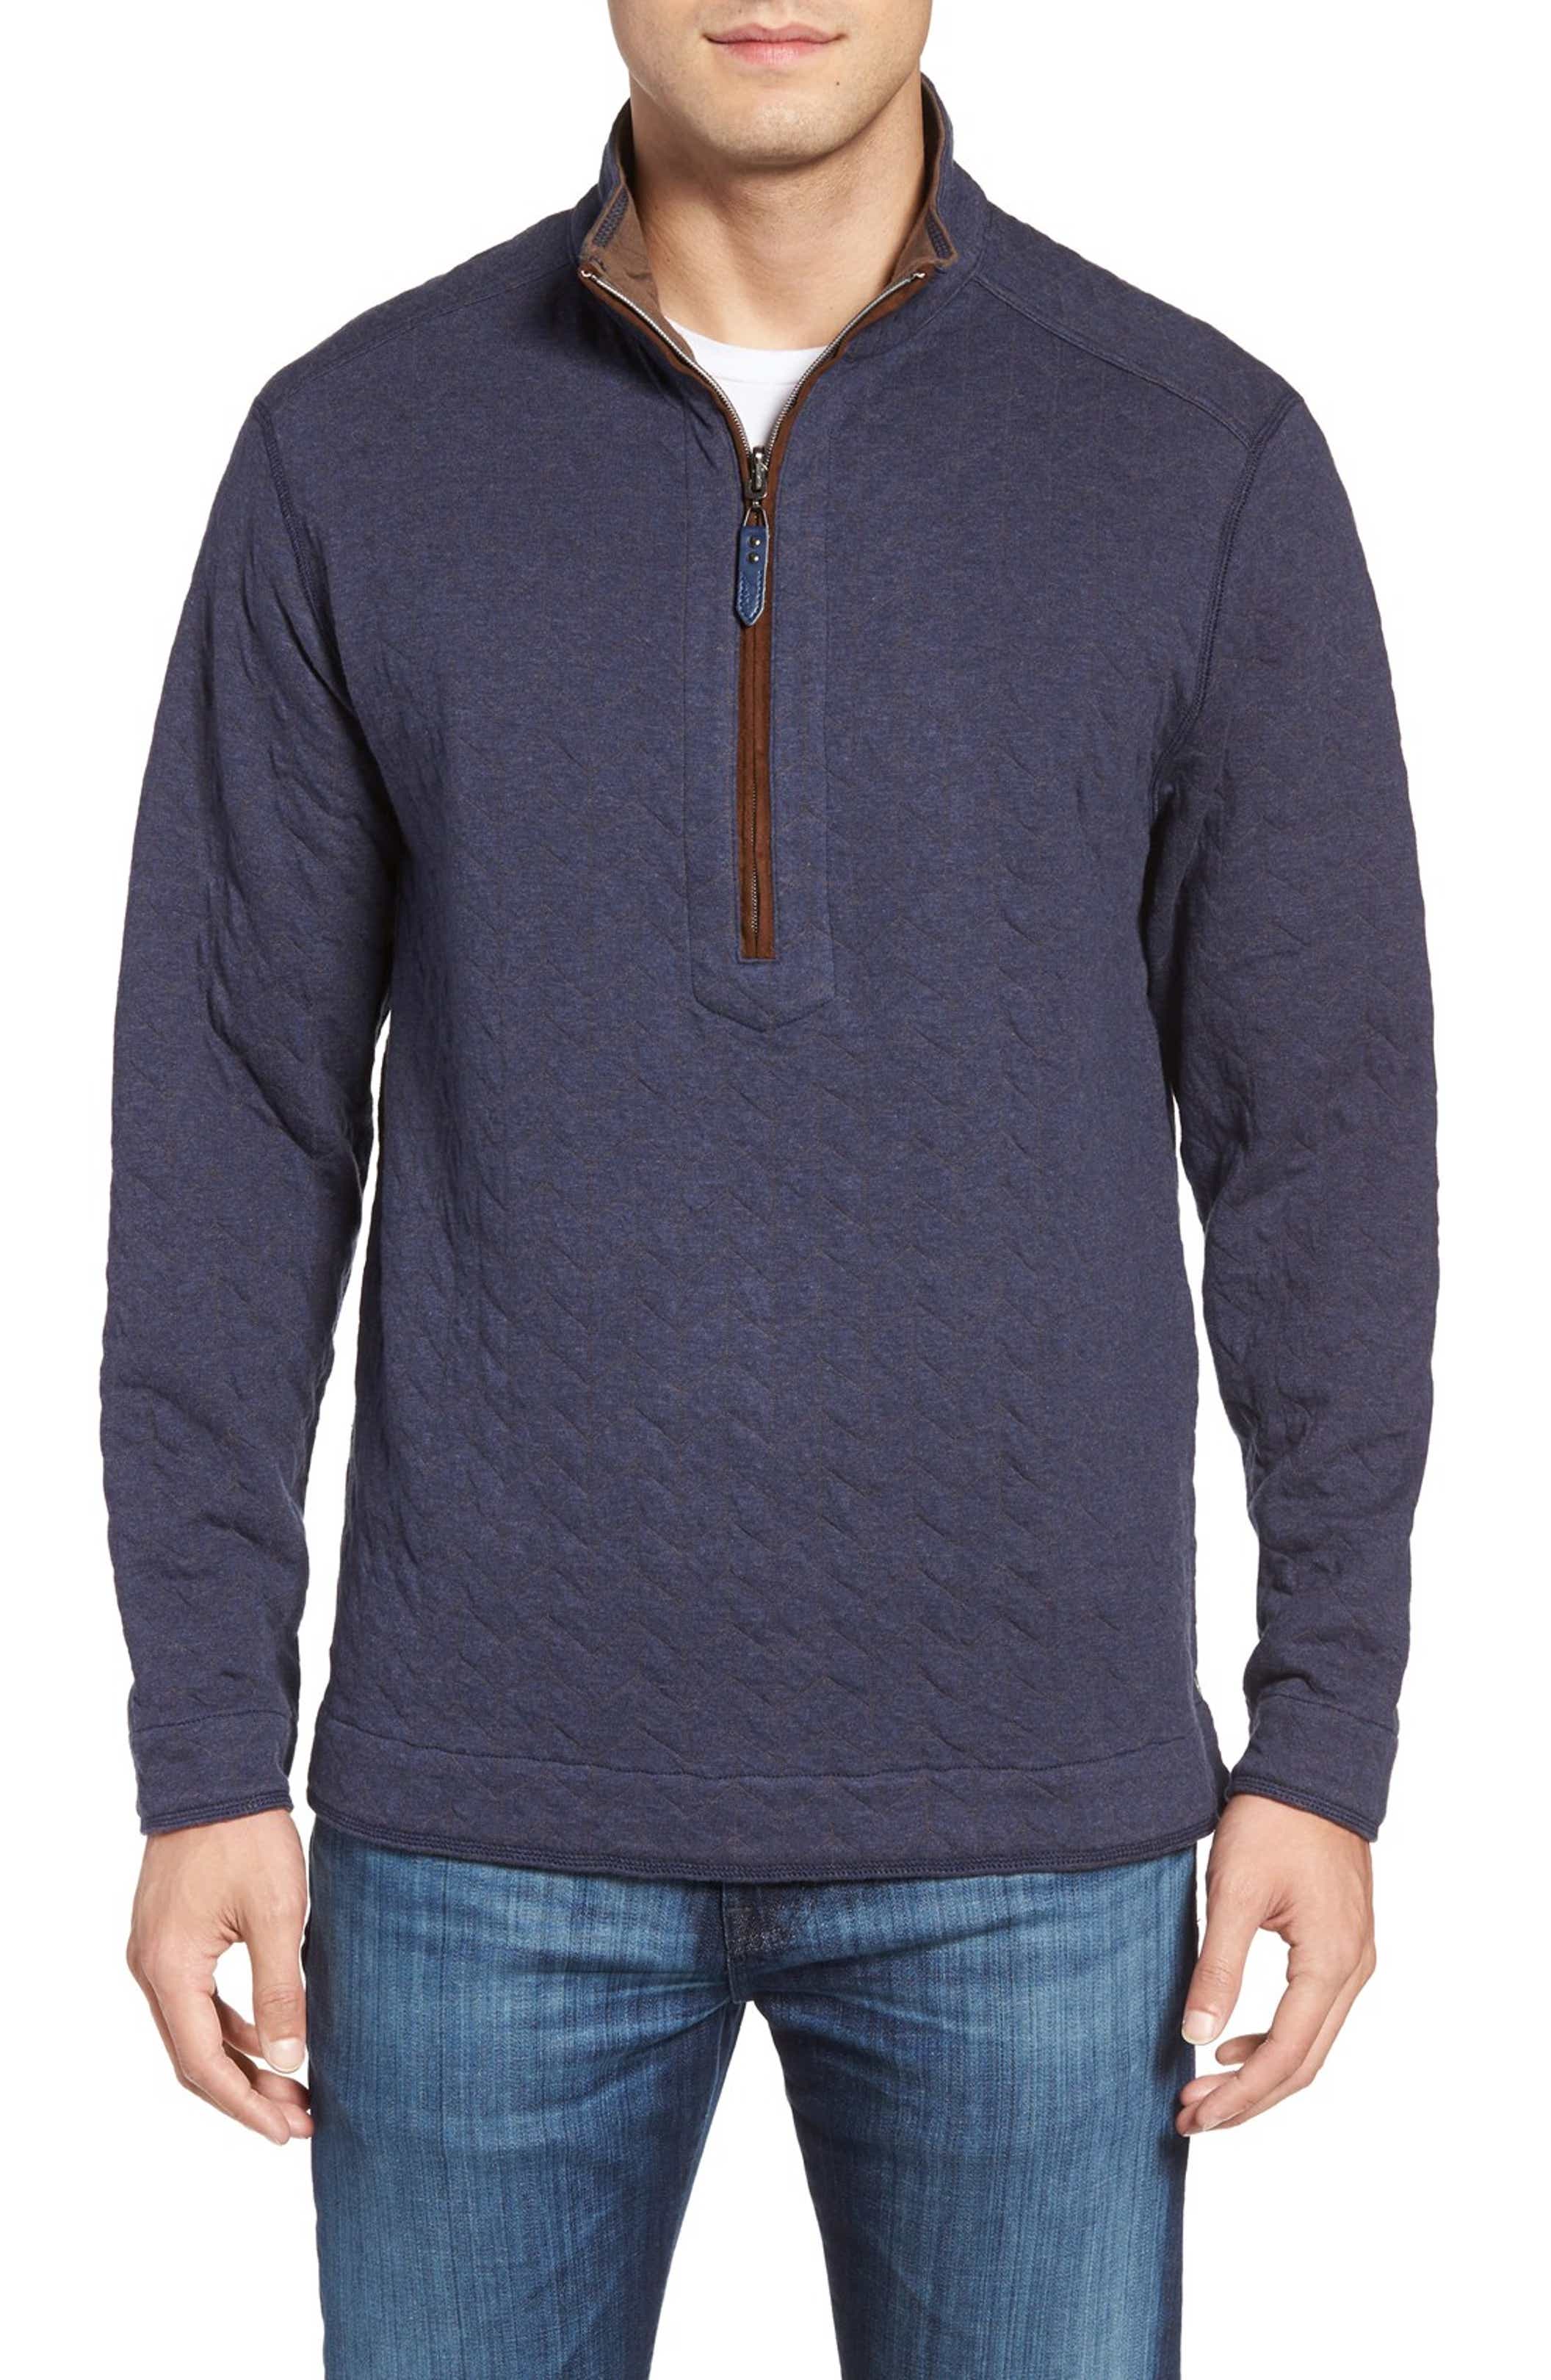 Tommy Bahama 'Cobble Hill' Reversible Quilted Quarter Zip Pullover ...